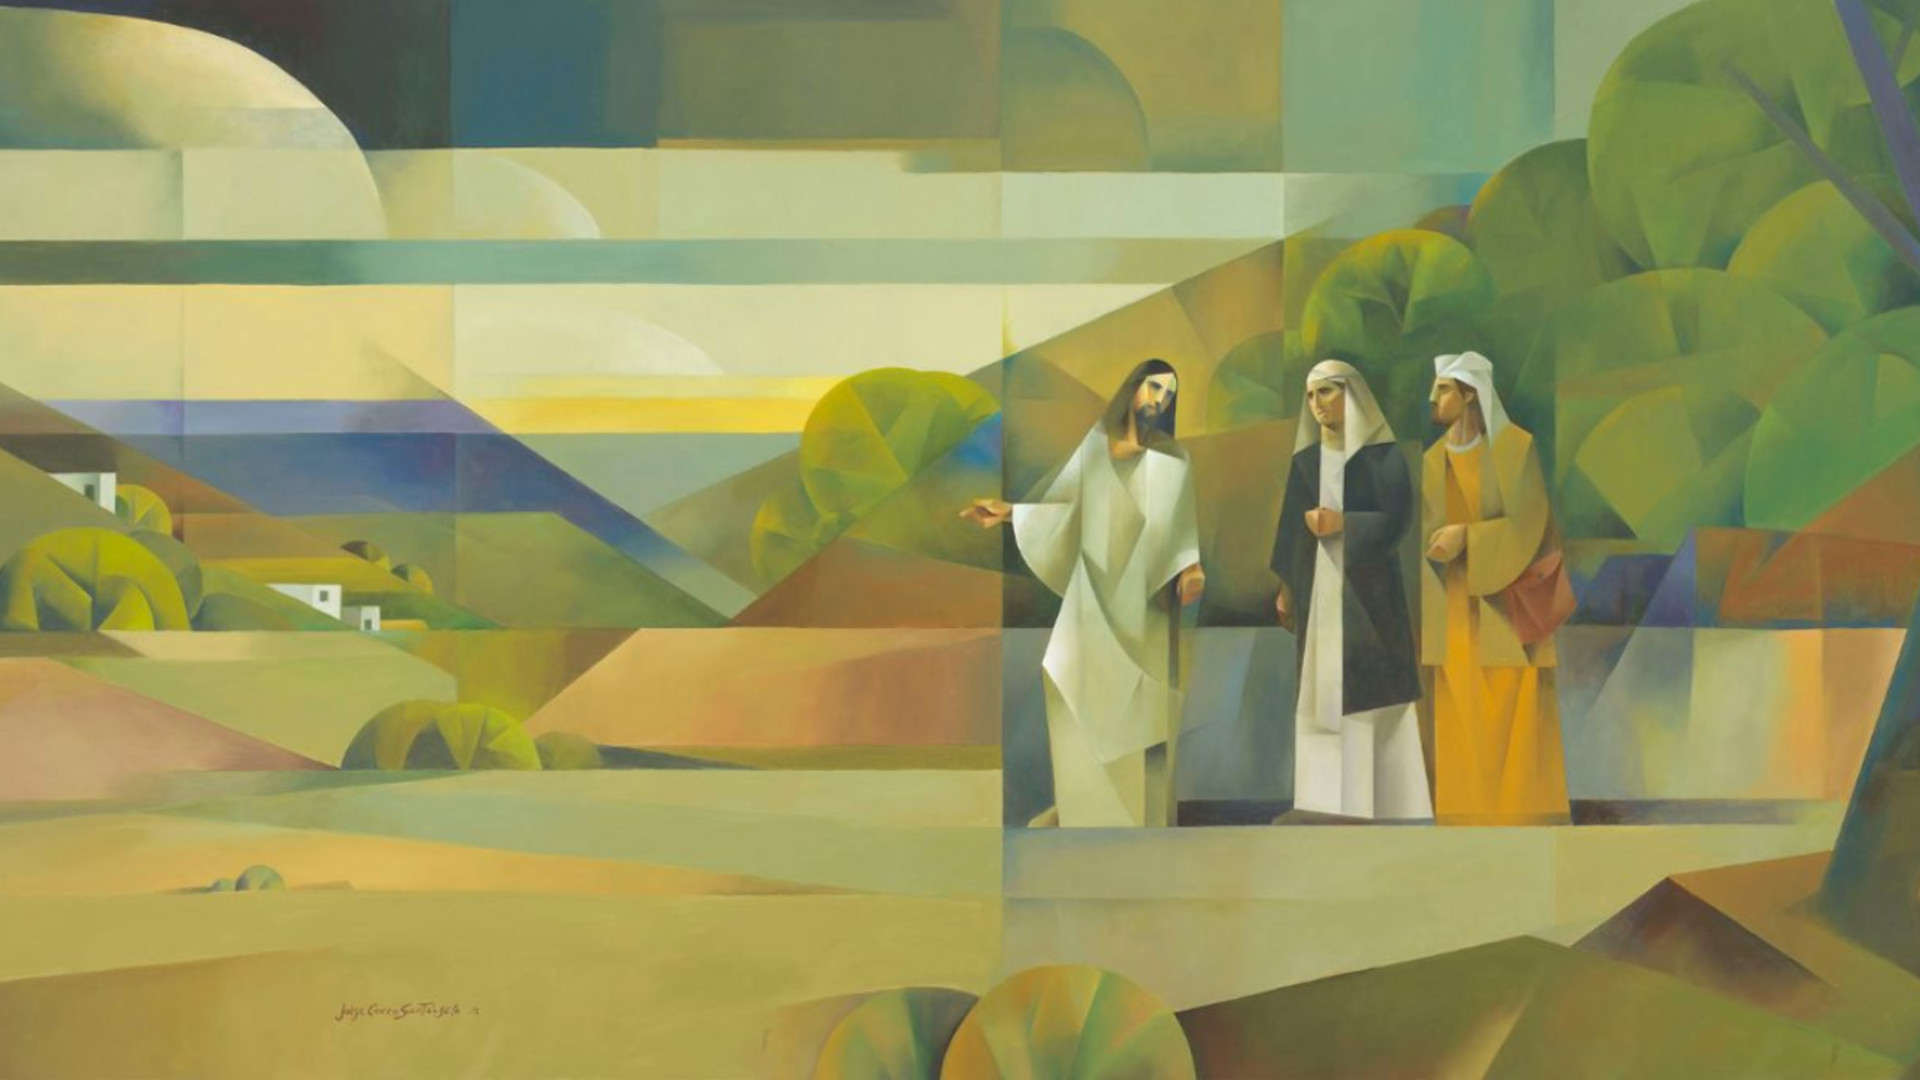 Jorge Cocco's painting, "Road to Emmaus," depicts Jesus Christ walking with Cleopas and an unnamed disciple on the road to Emmaus.